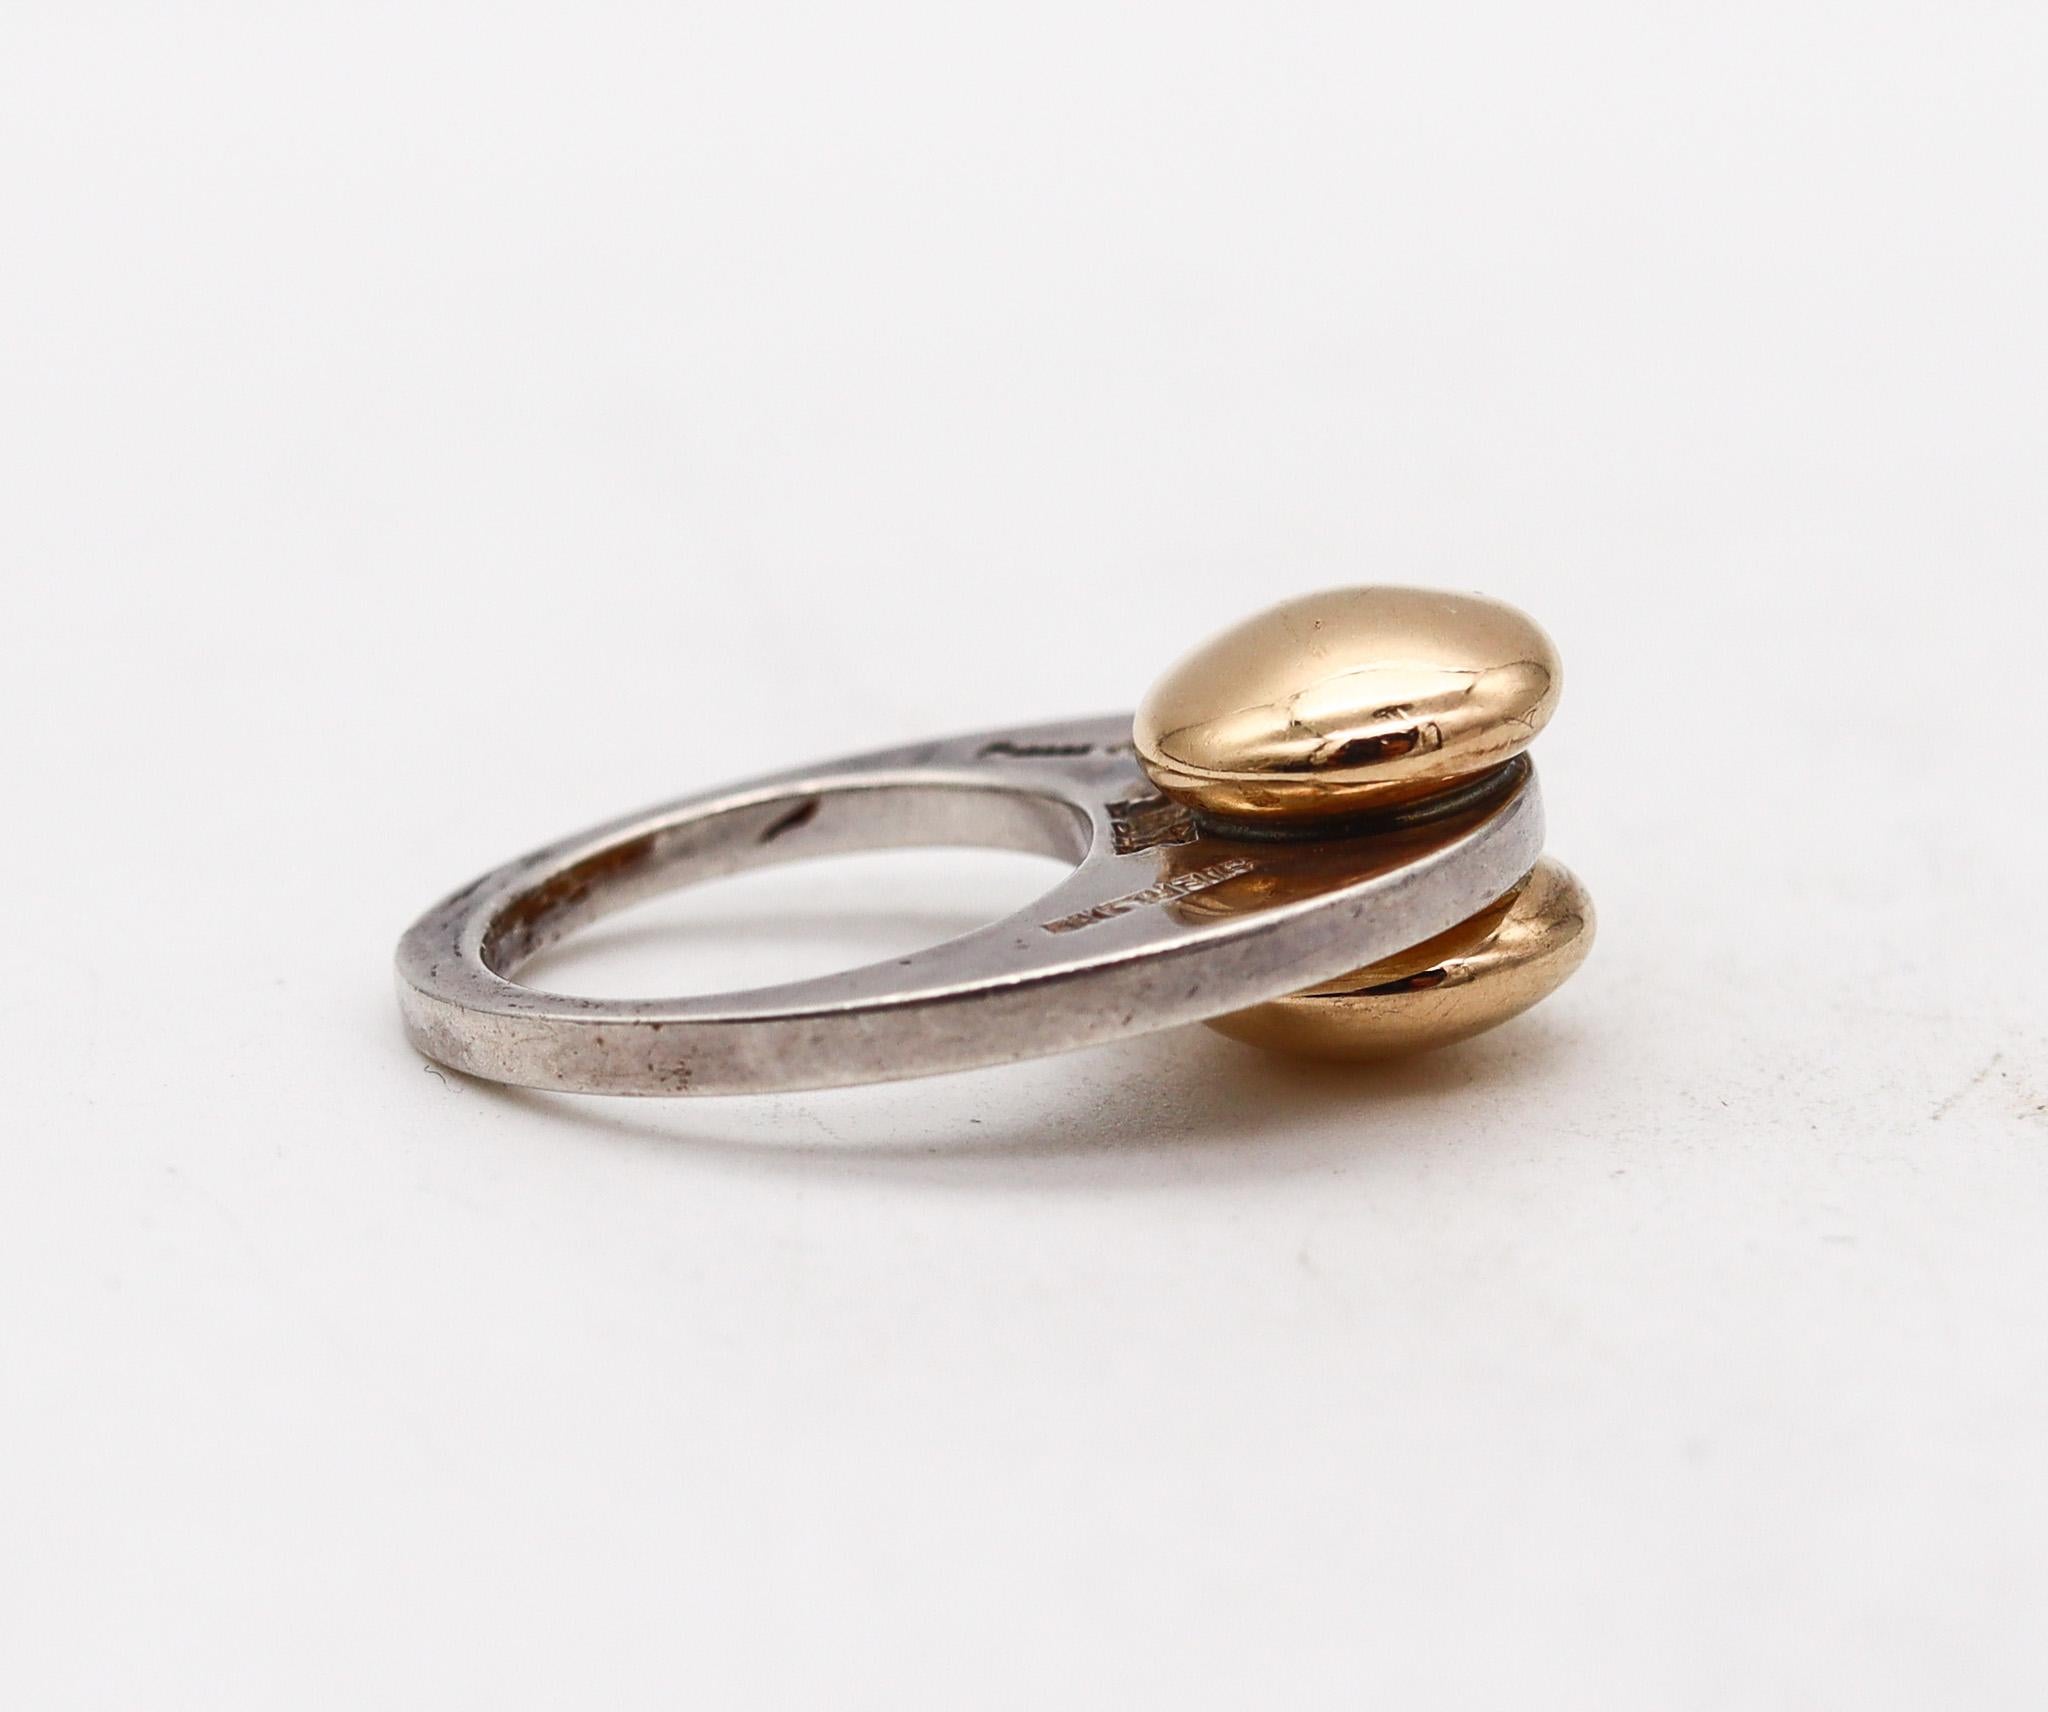 Modernist Pierre Cardin 1970 Paris Geometric Sculptural Ring in 14kt Gold and Sterling For Sale